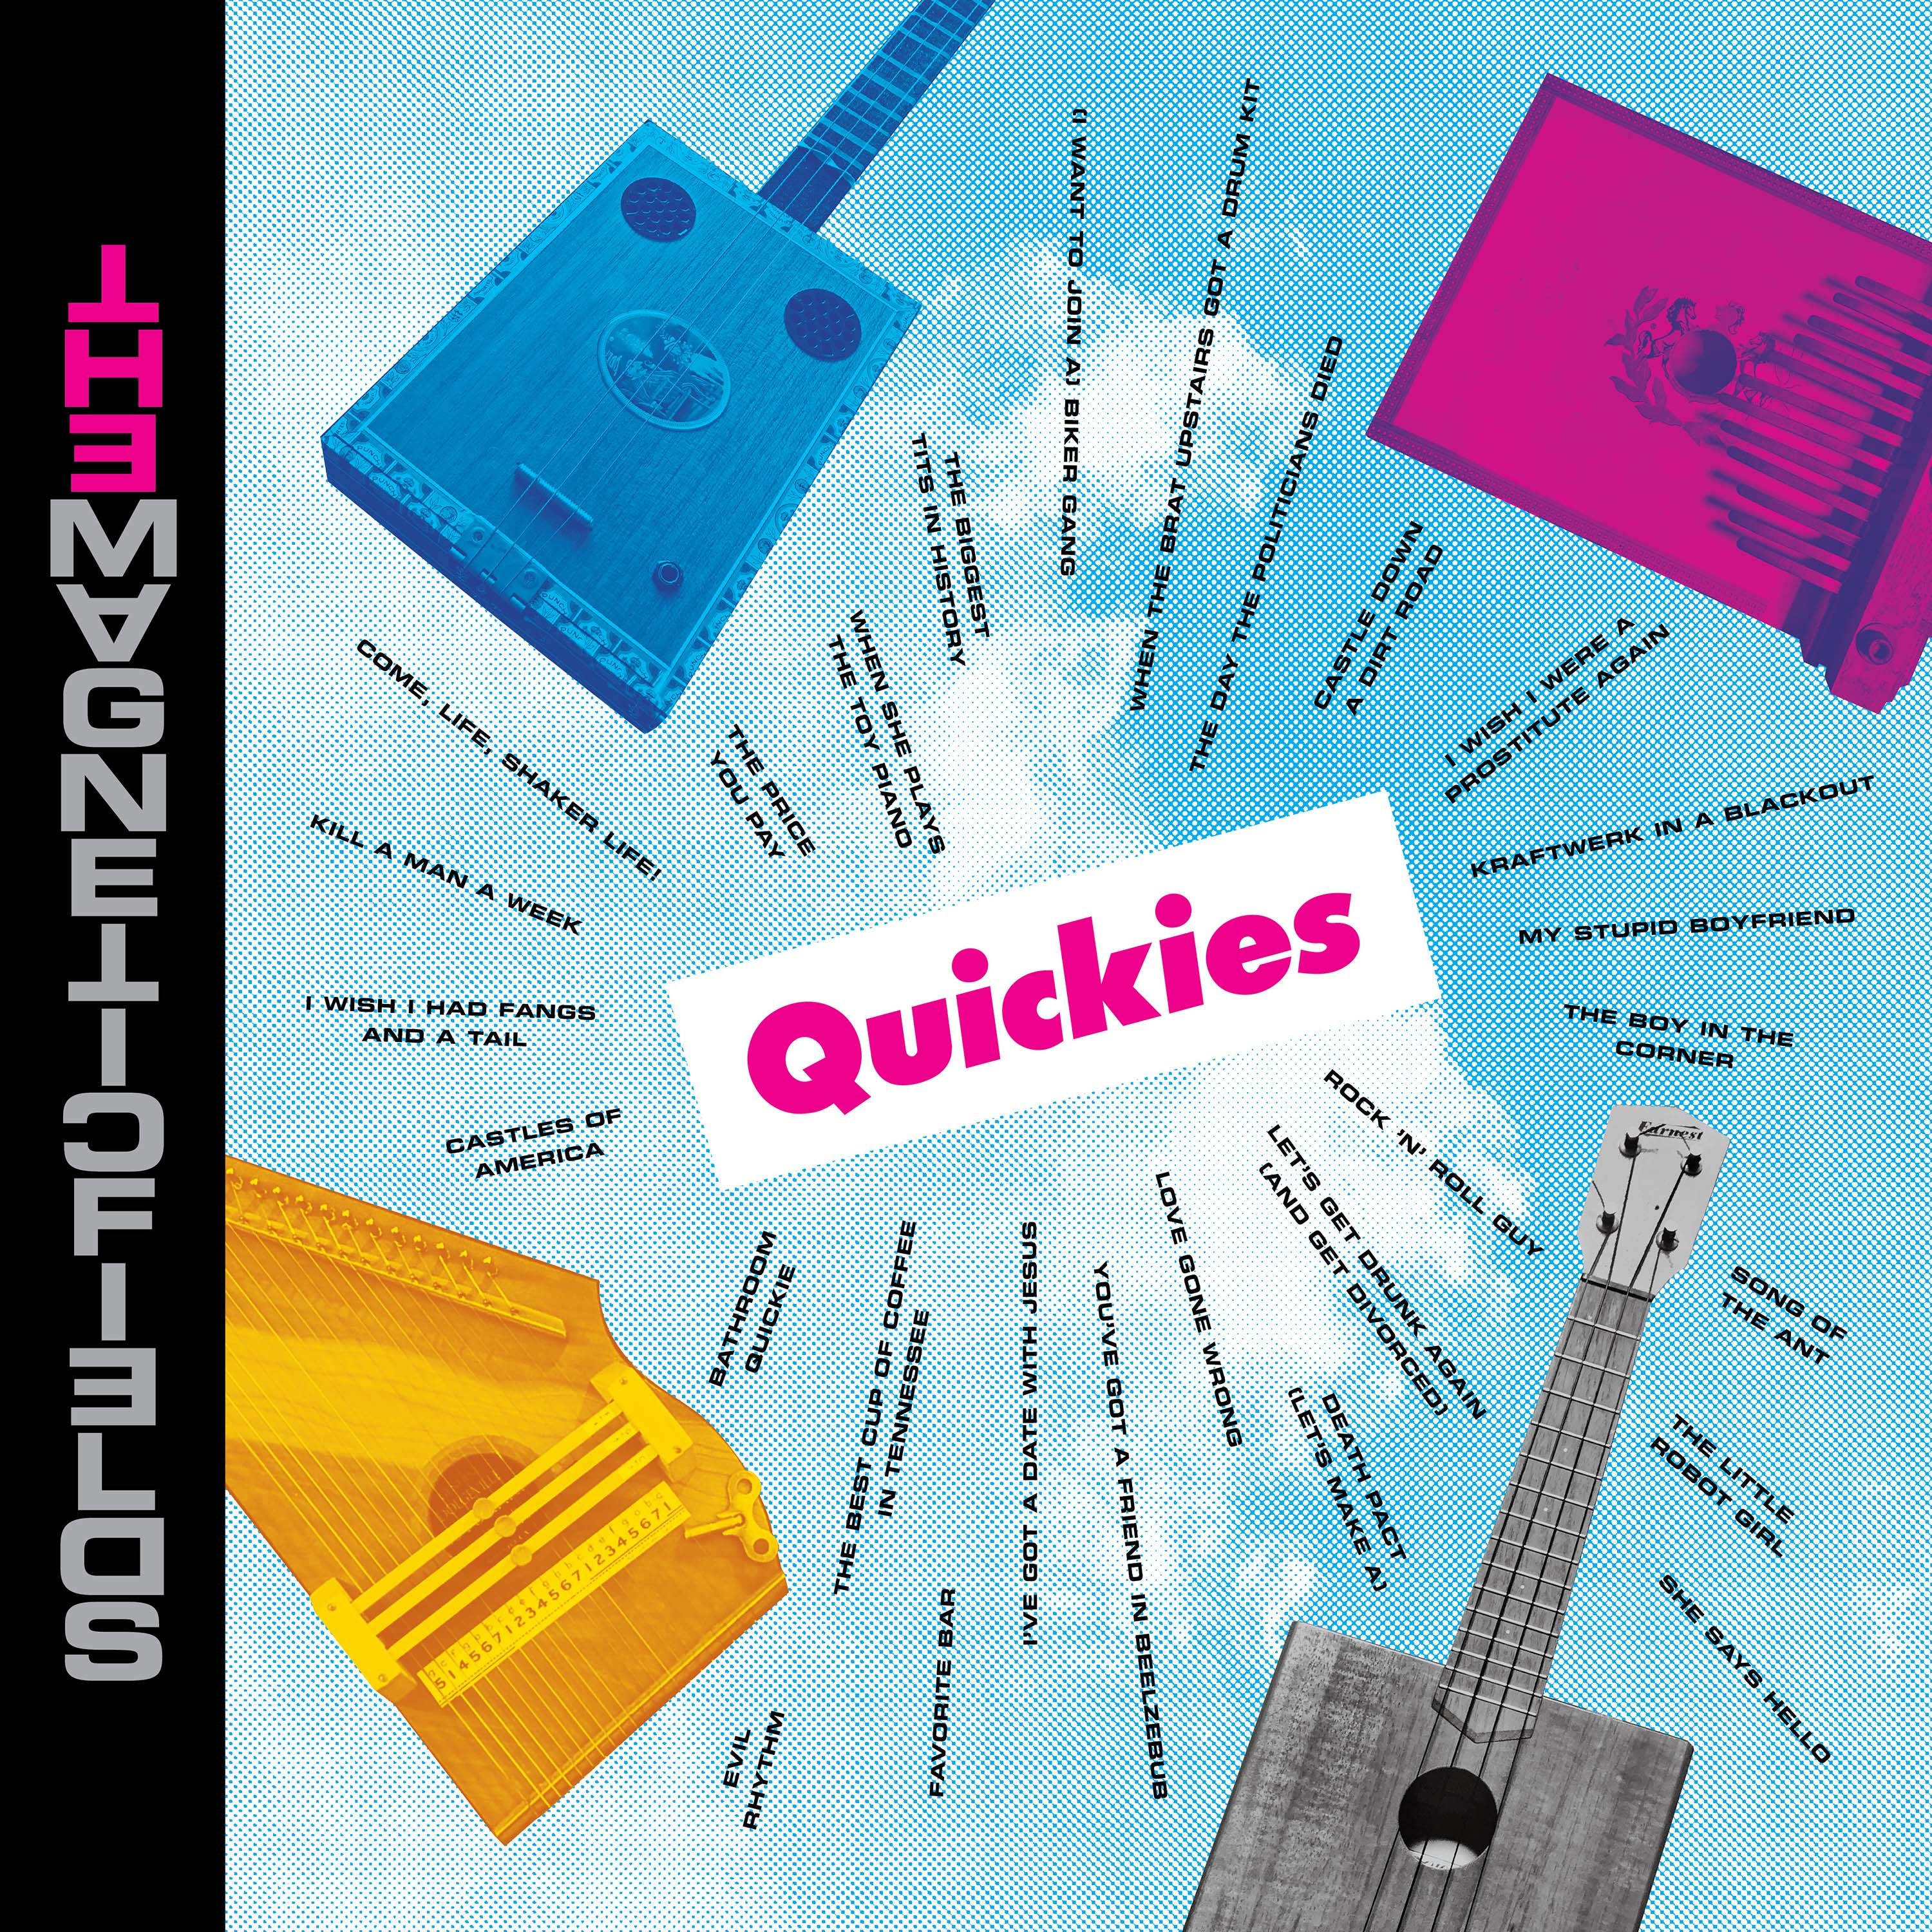 The Magnetic Fields - Quickies: CD